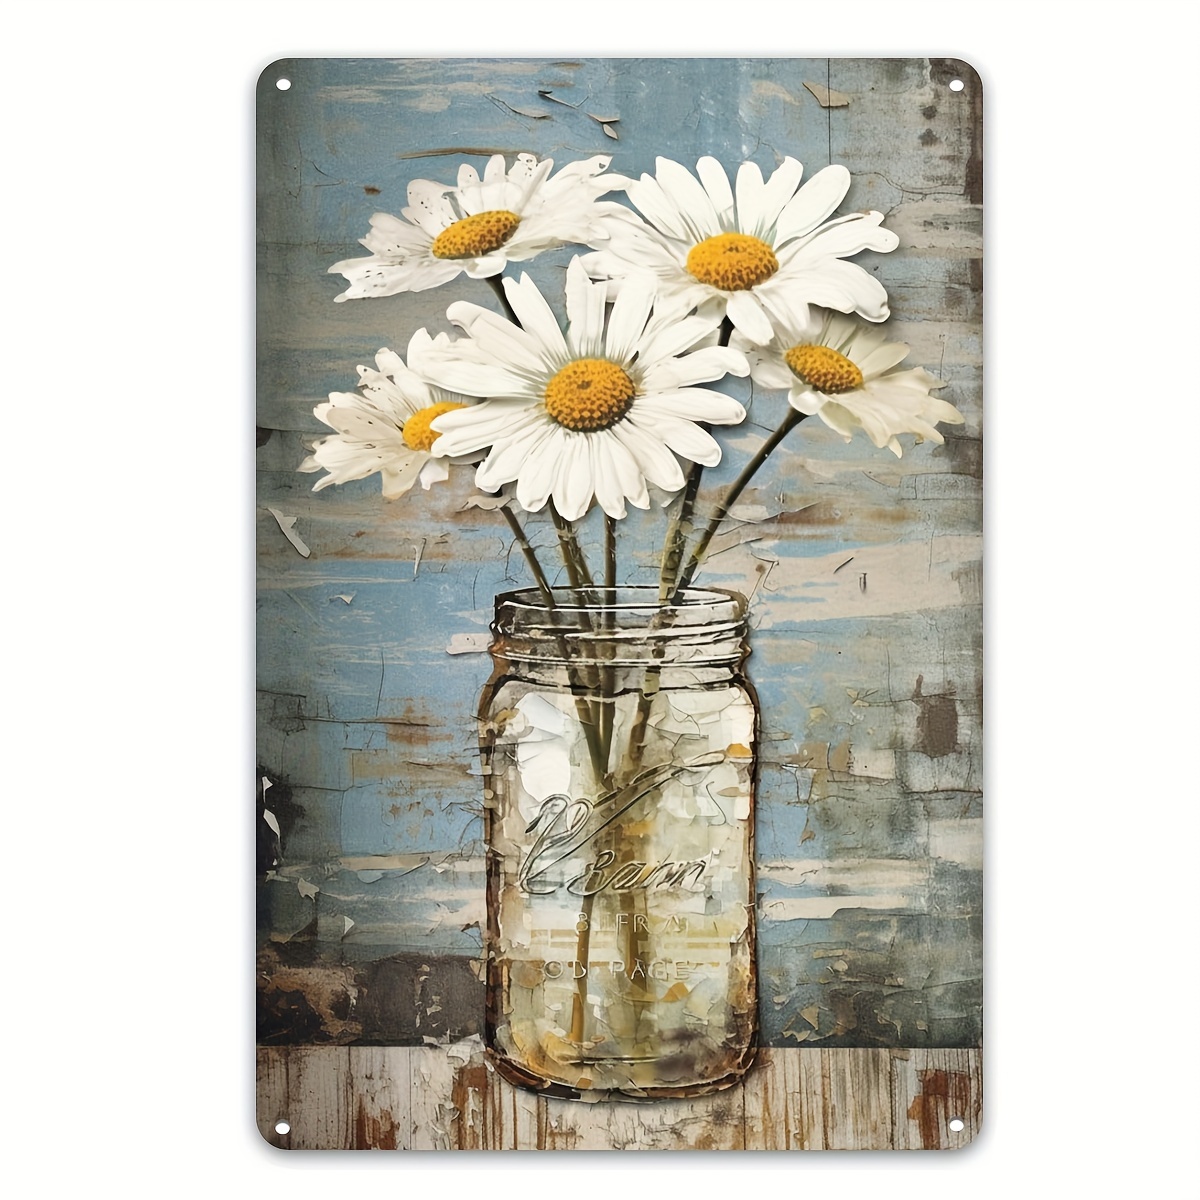 

1pc Retro Metal Aluminum Sign, Jar With White Daisy Floral Poster Tin Sign, Wall Art Decor, Vintage Garage Wall Decor, Cafe Bar Club Living Room Wall Decor Plaque